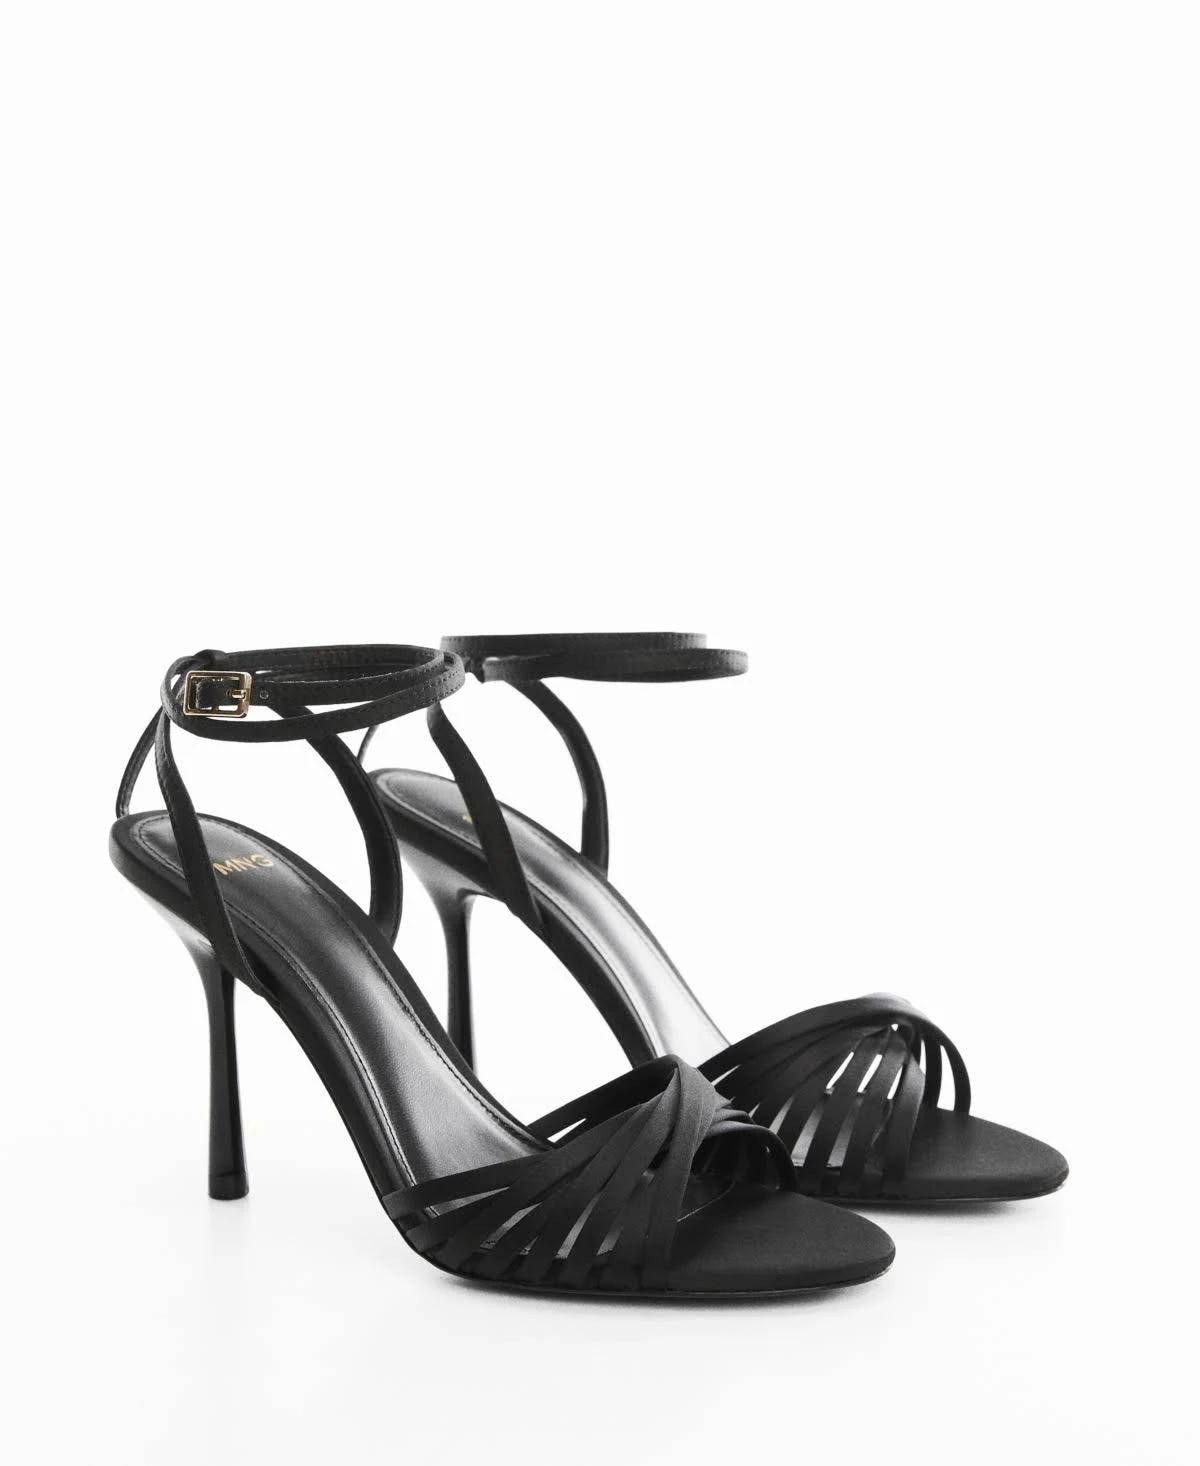 Black Strappy Heeled Sandals by Mango | Image